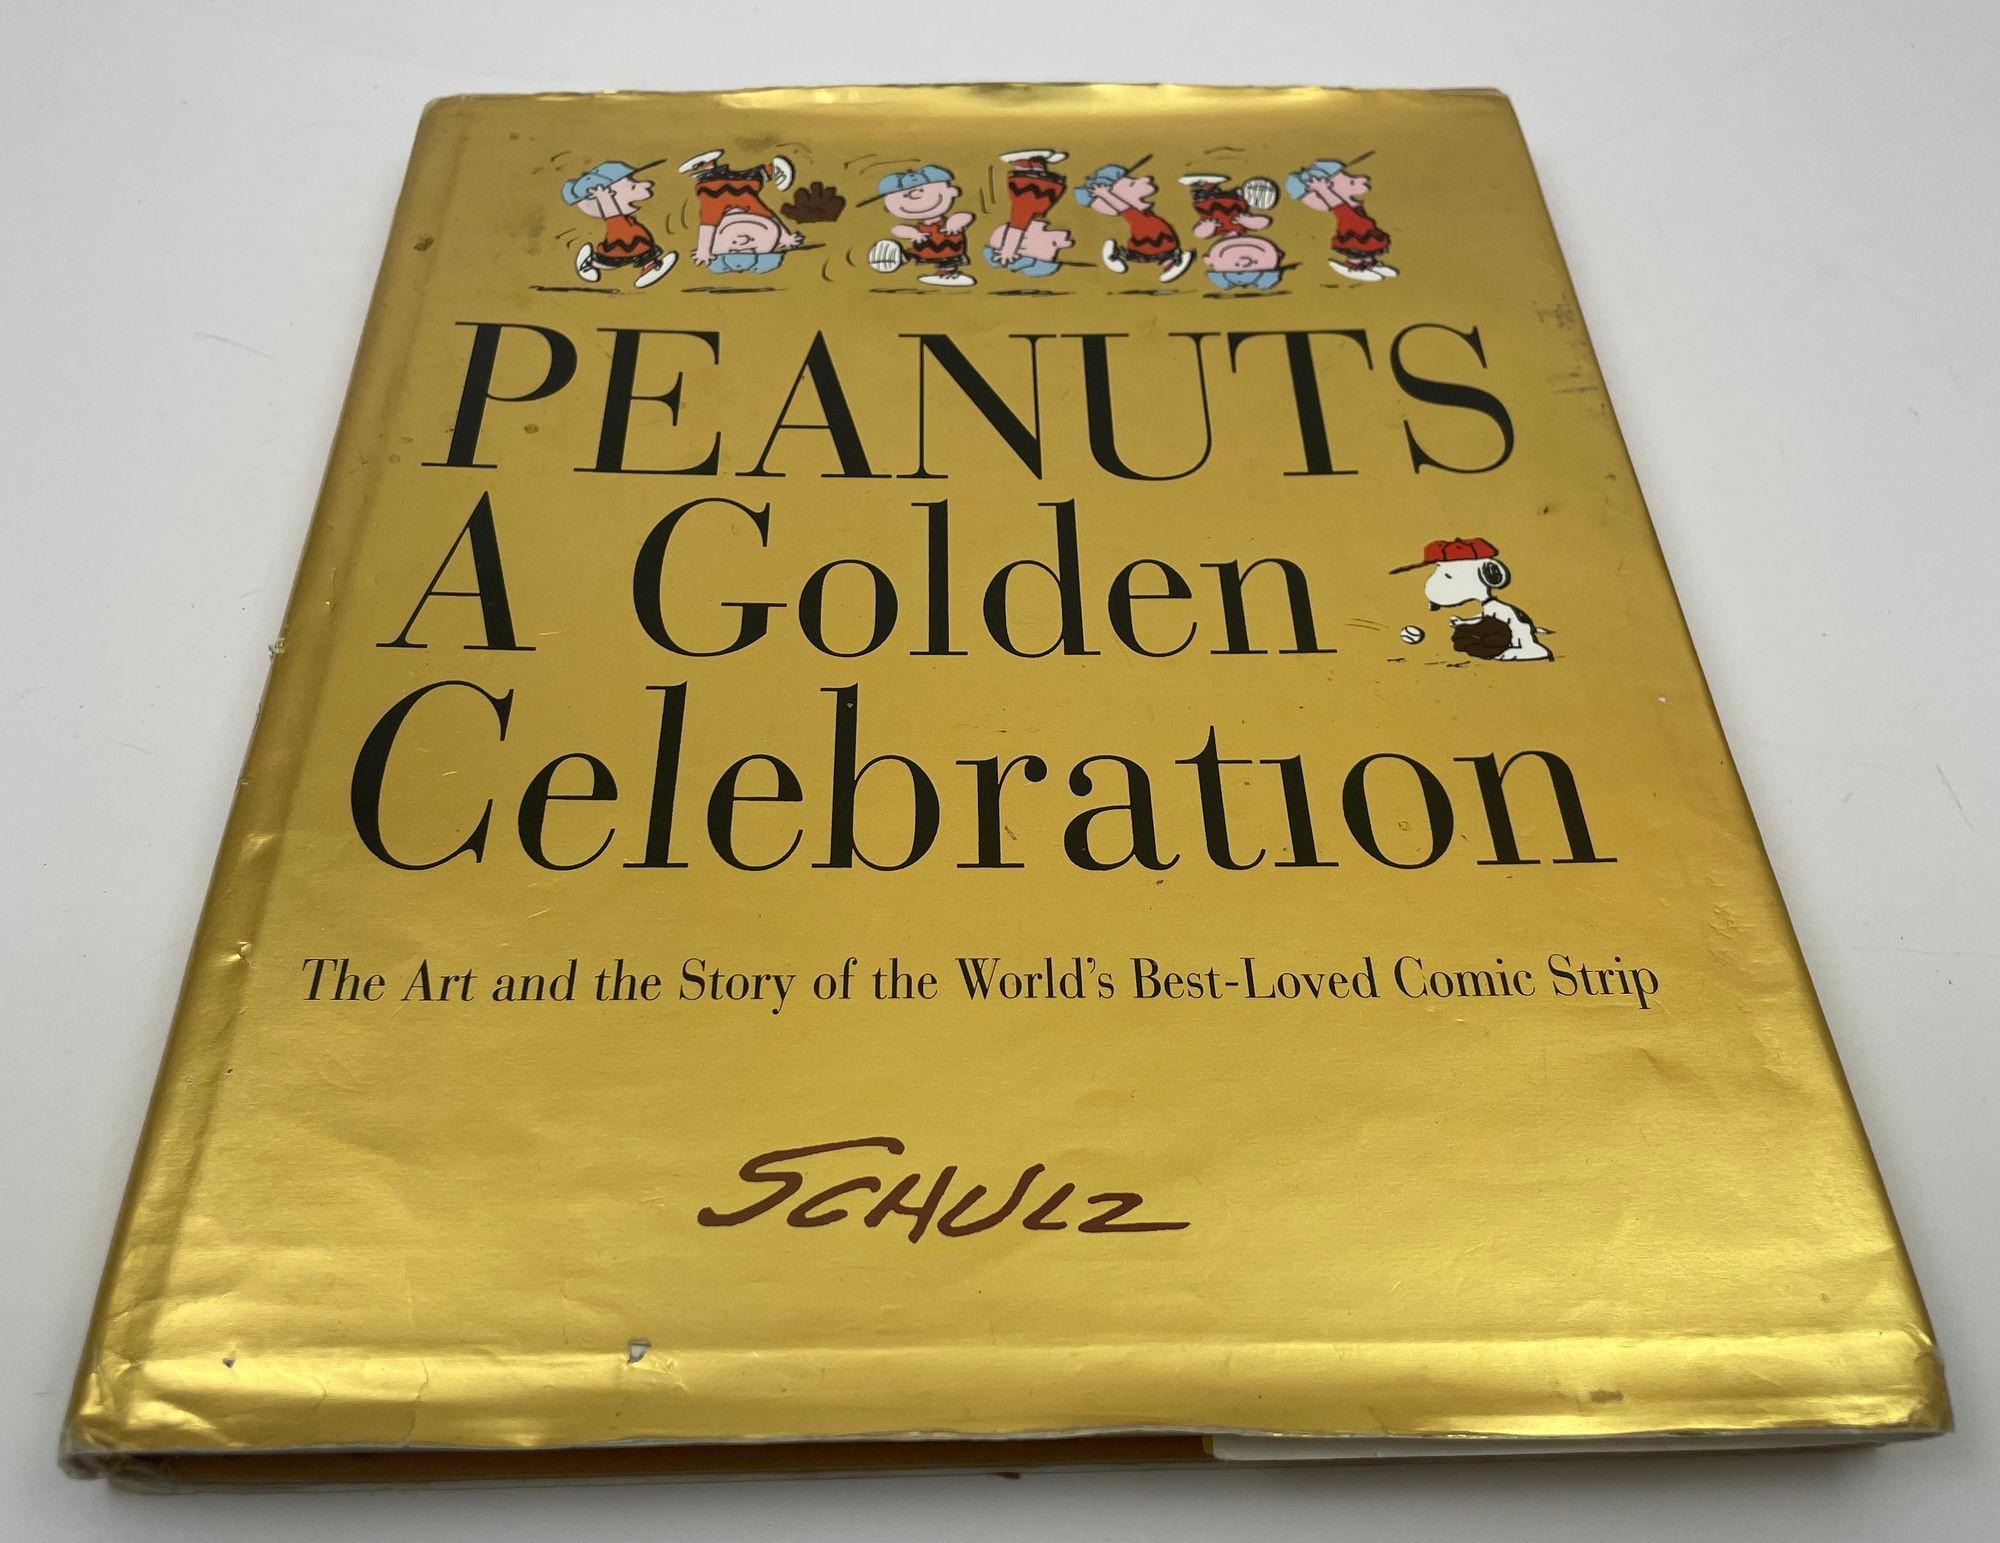 Folk Art A Golden Celebration the Art and the Story of the World's Best-loved Comic Strip